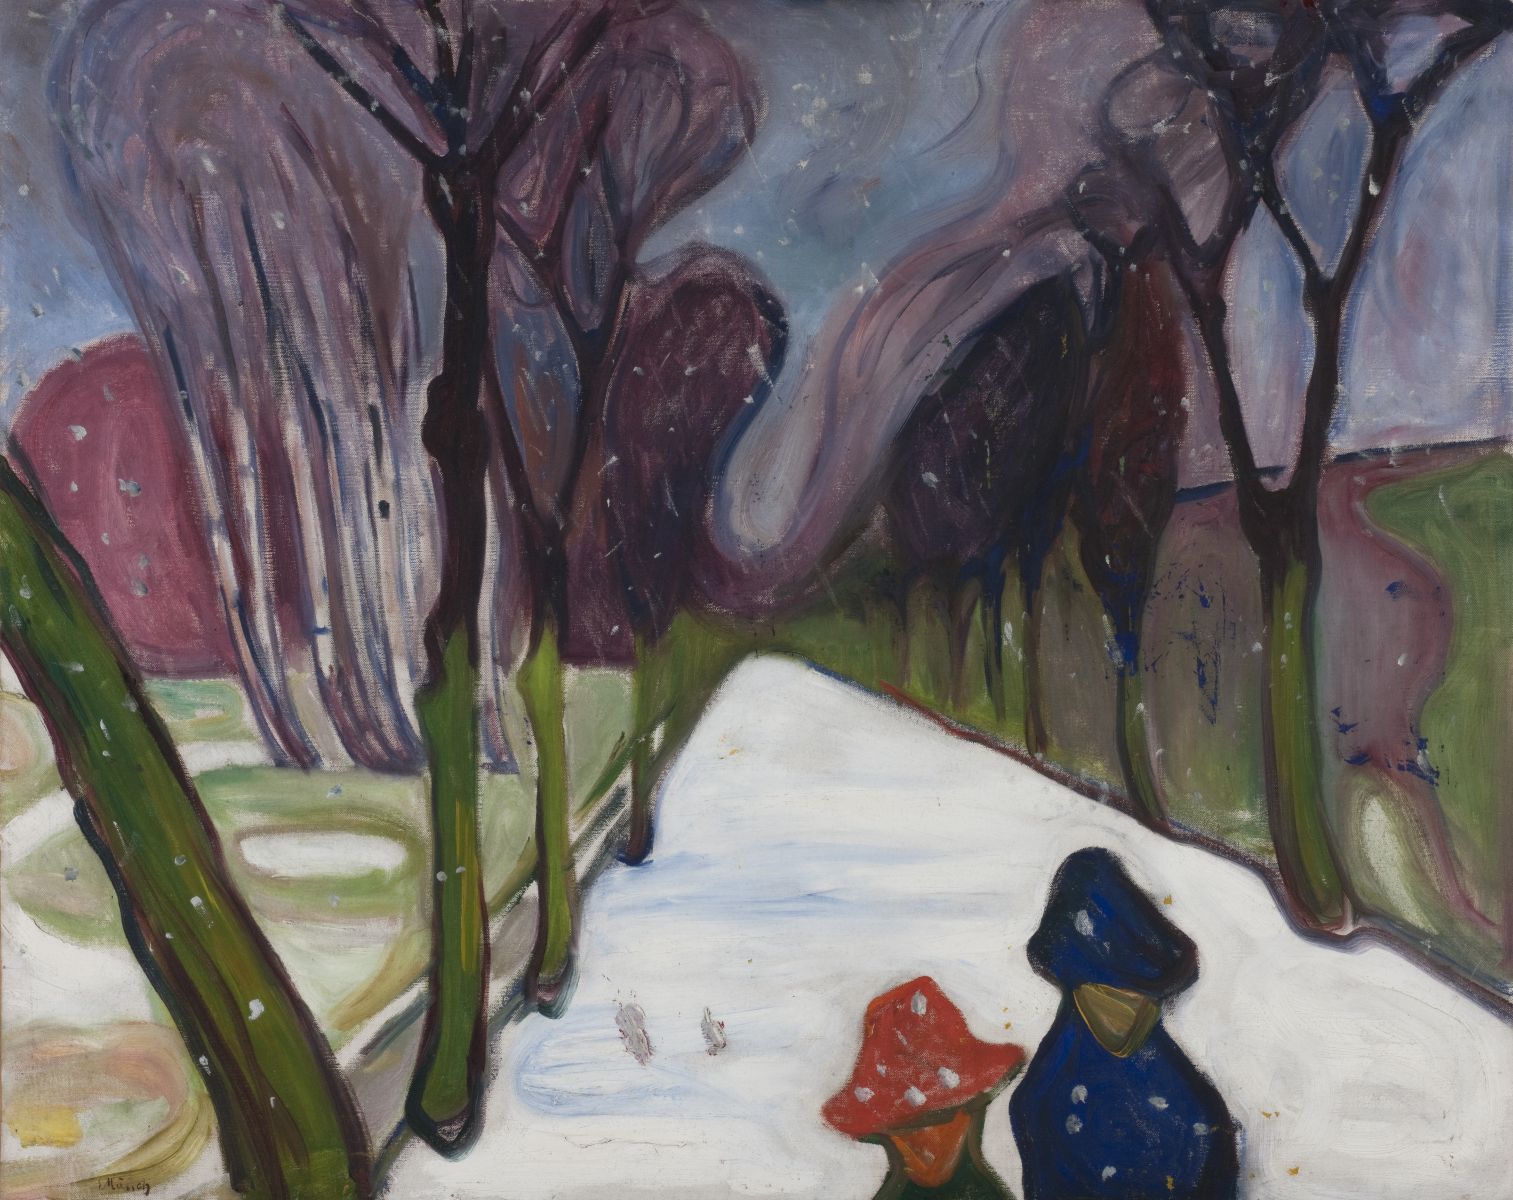 New Snow in the Avenue by Edvard Munch - 1896 - 90 x 119.5 cm Munch Museum